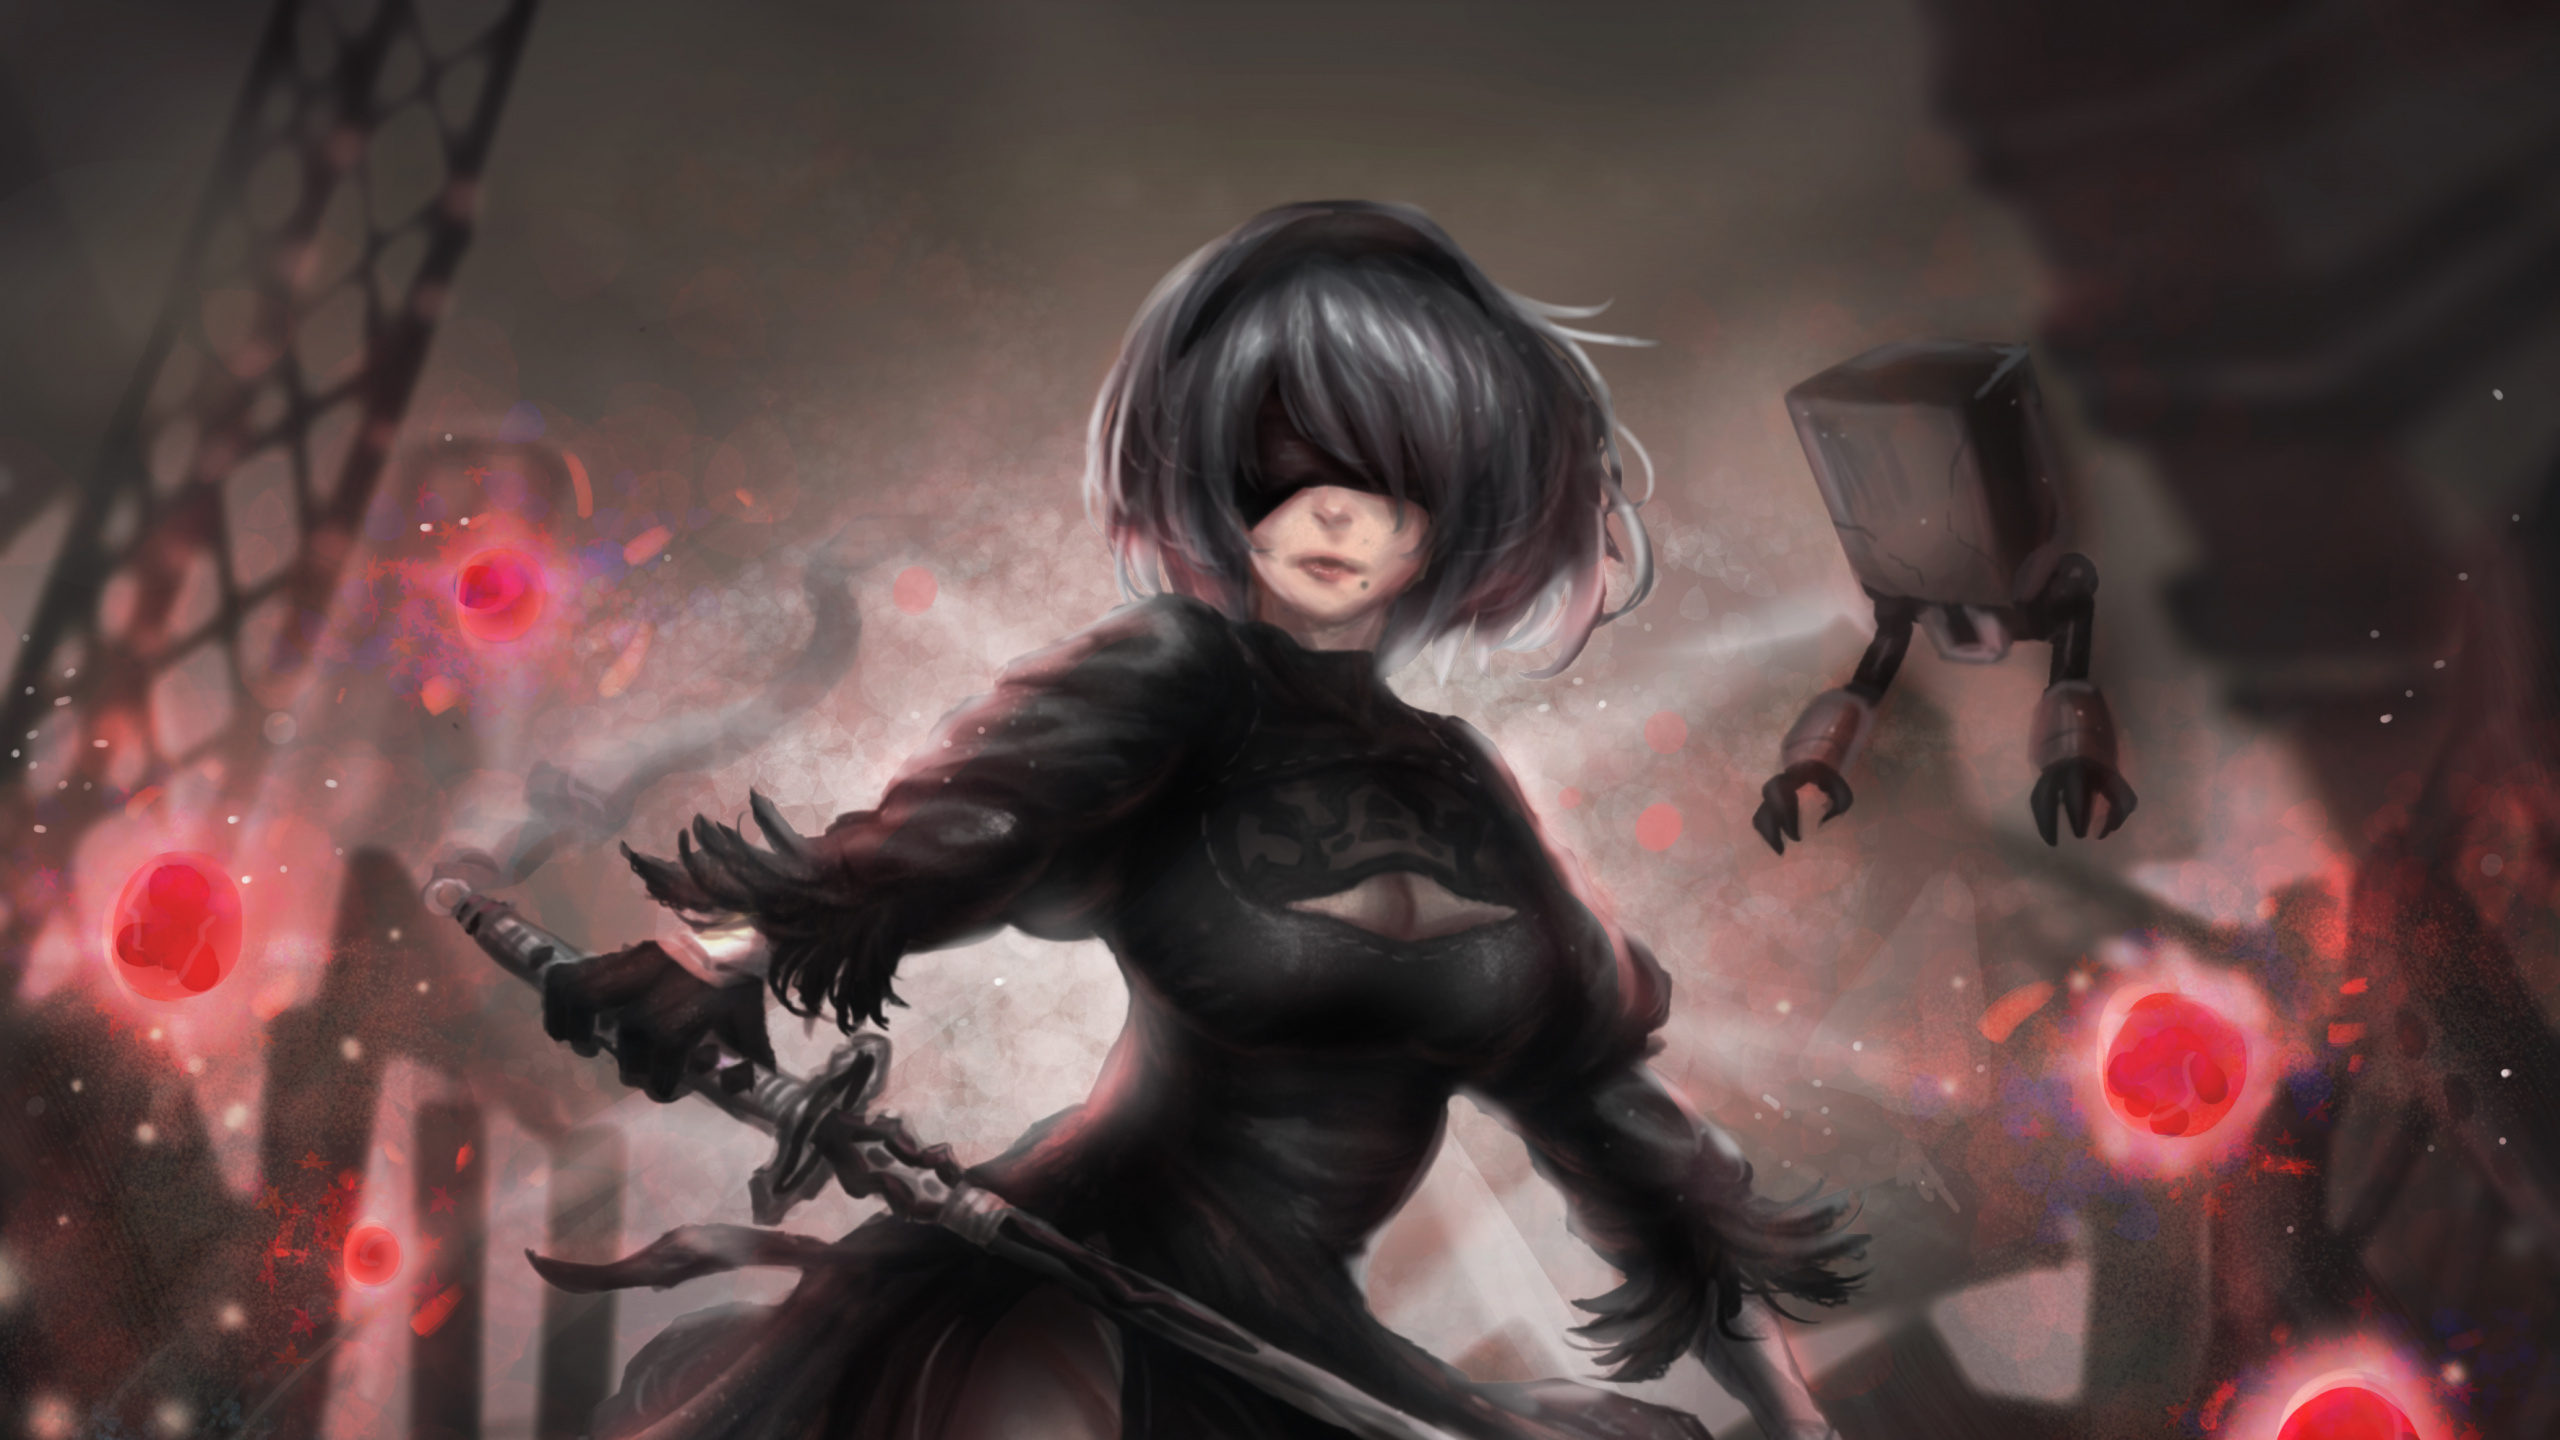 Woman in Black Long Sleeve Shirt Holding Black Weapon. Wallpaper in 2560x1440 Resolution